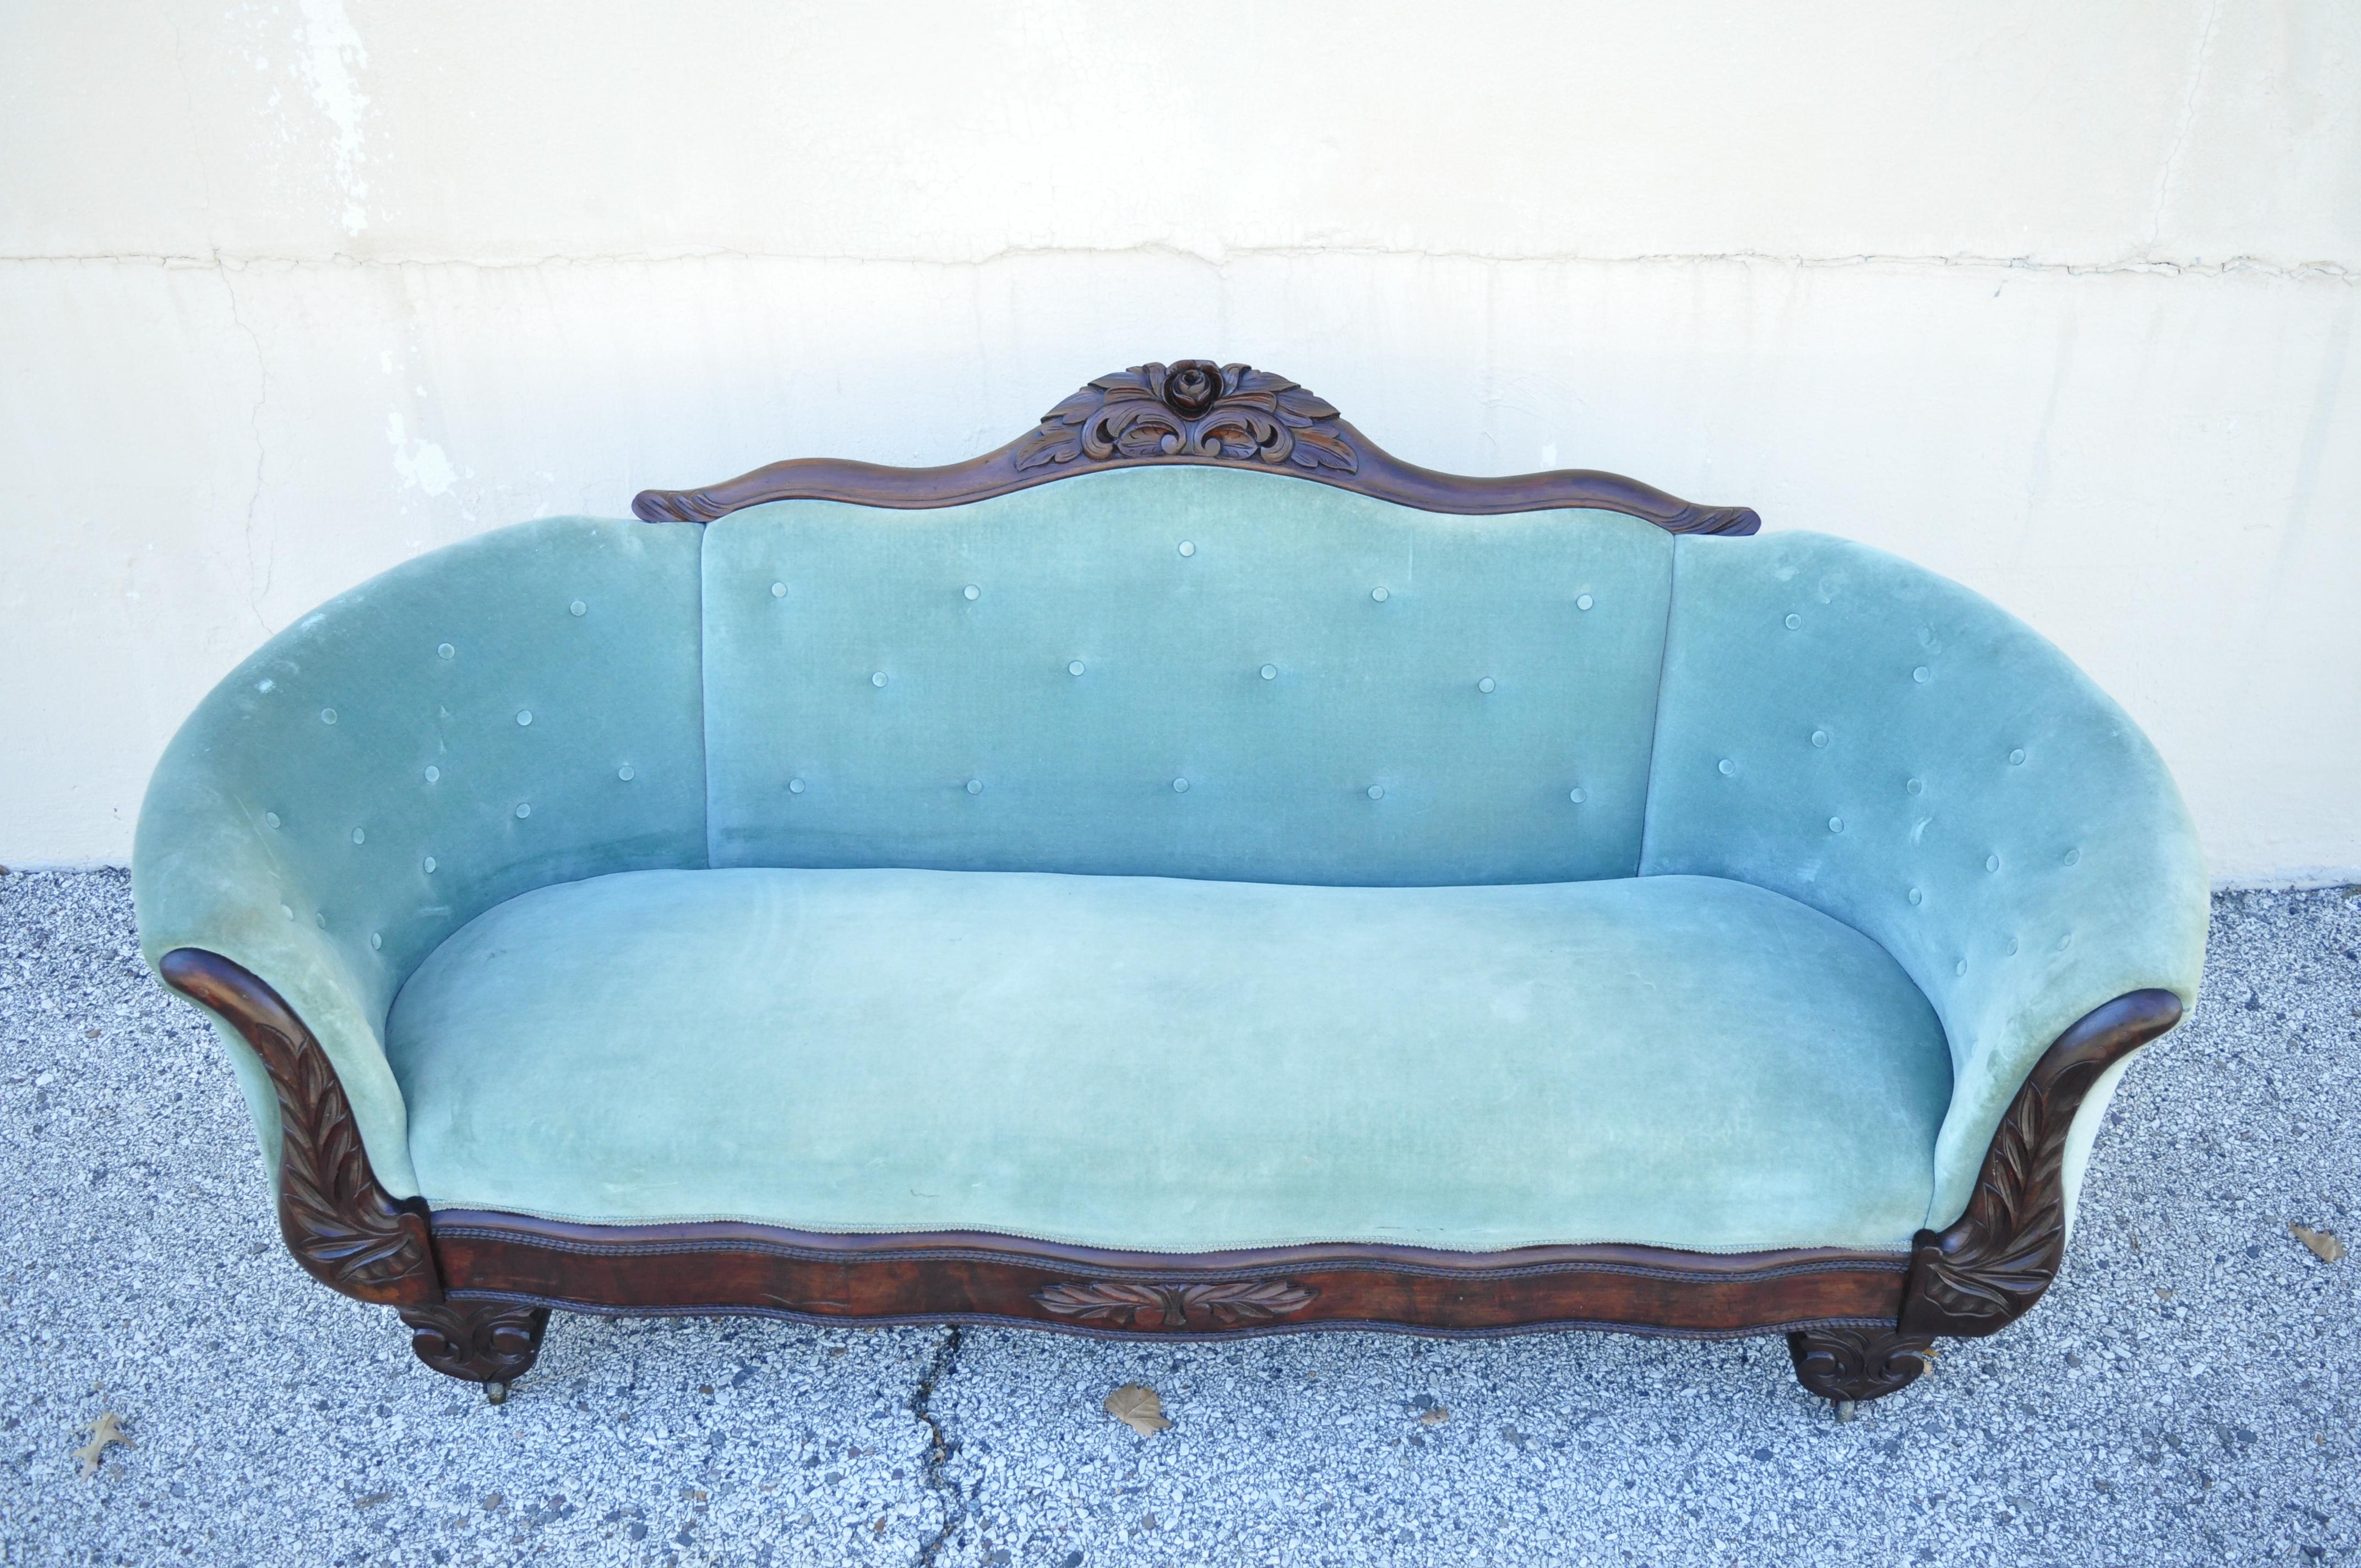 Antique American Victorian Empire crotch Mahogany green mohair serpentine sofa. Item features crotch mahogany serpentine frame, rolling casters, original green mohair upholstery, nicely carved frame, quality American craftsmanship, very nice antique